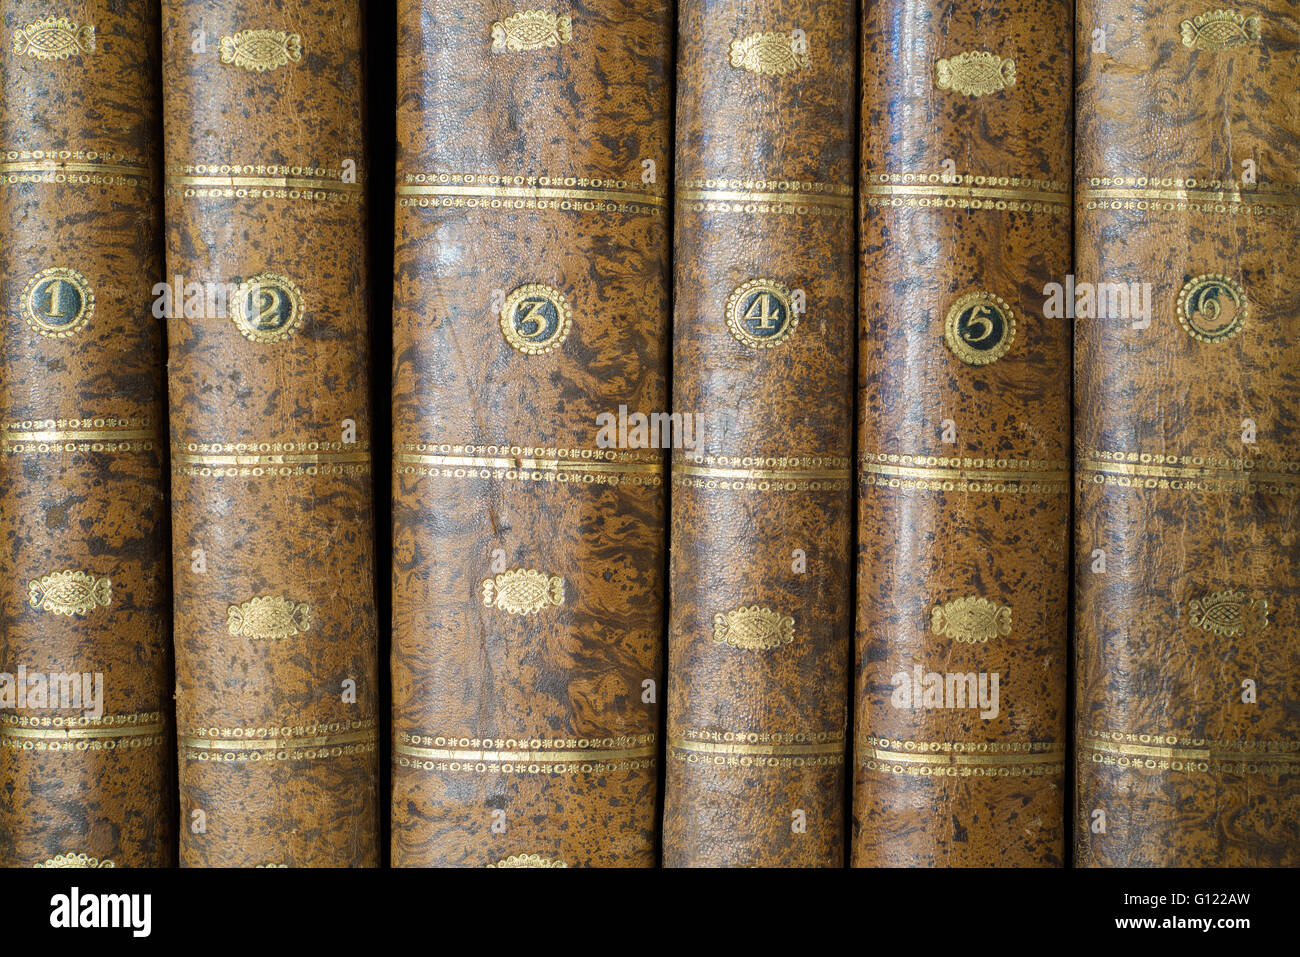 six spines of old books Stock Photo